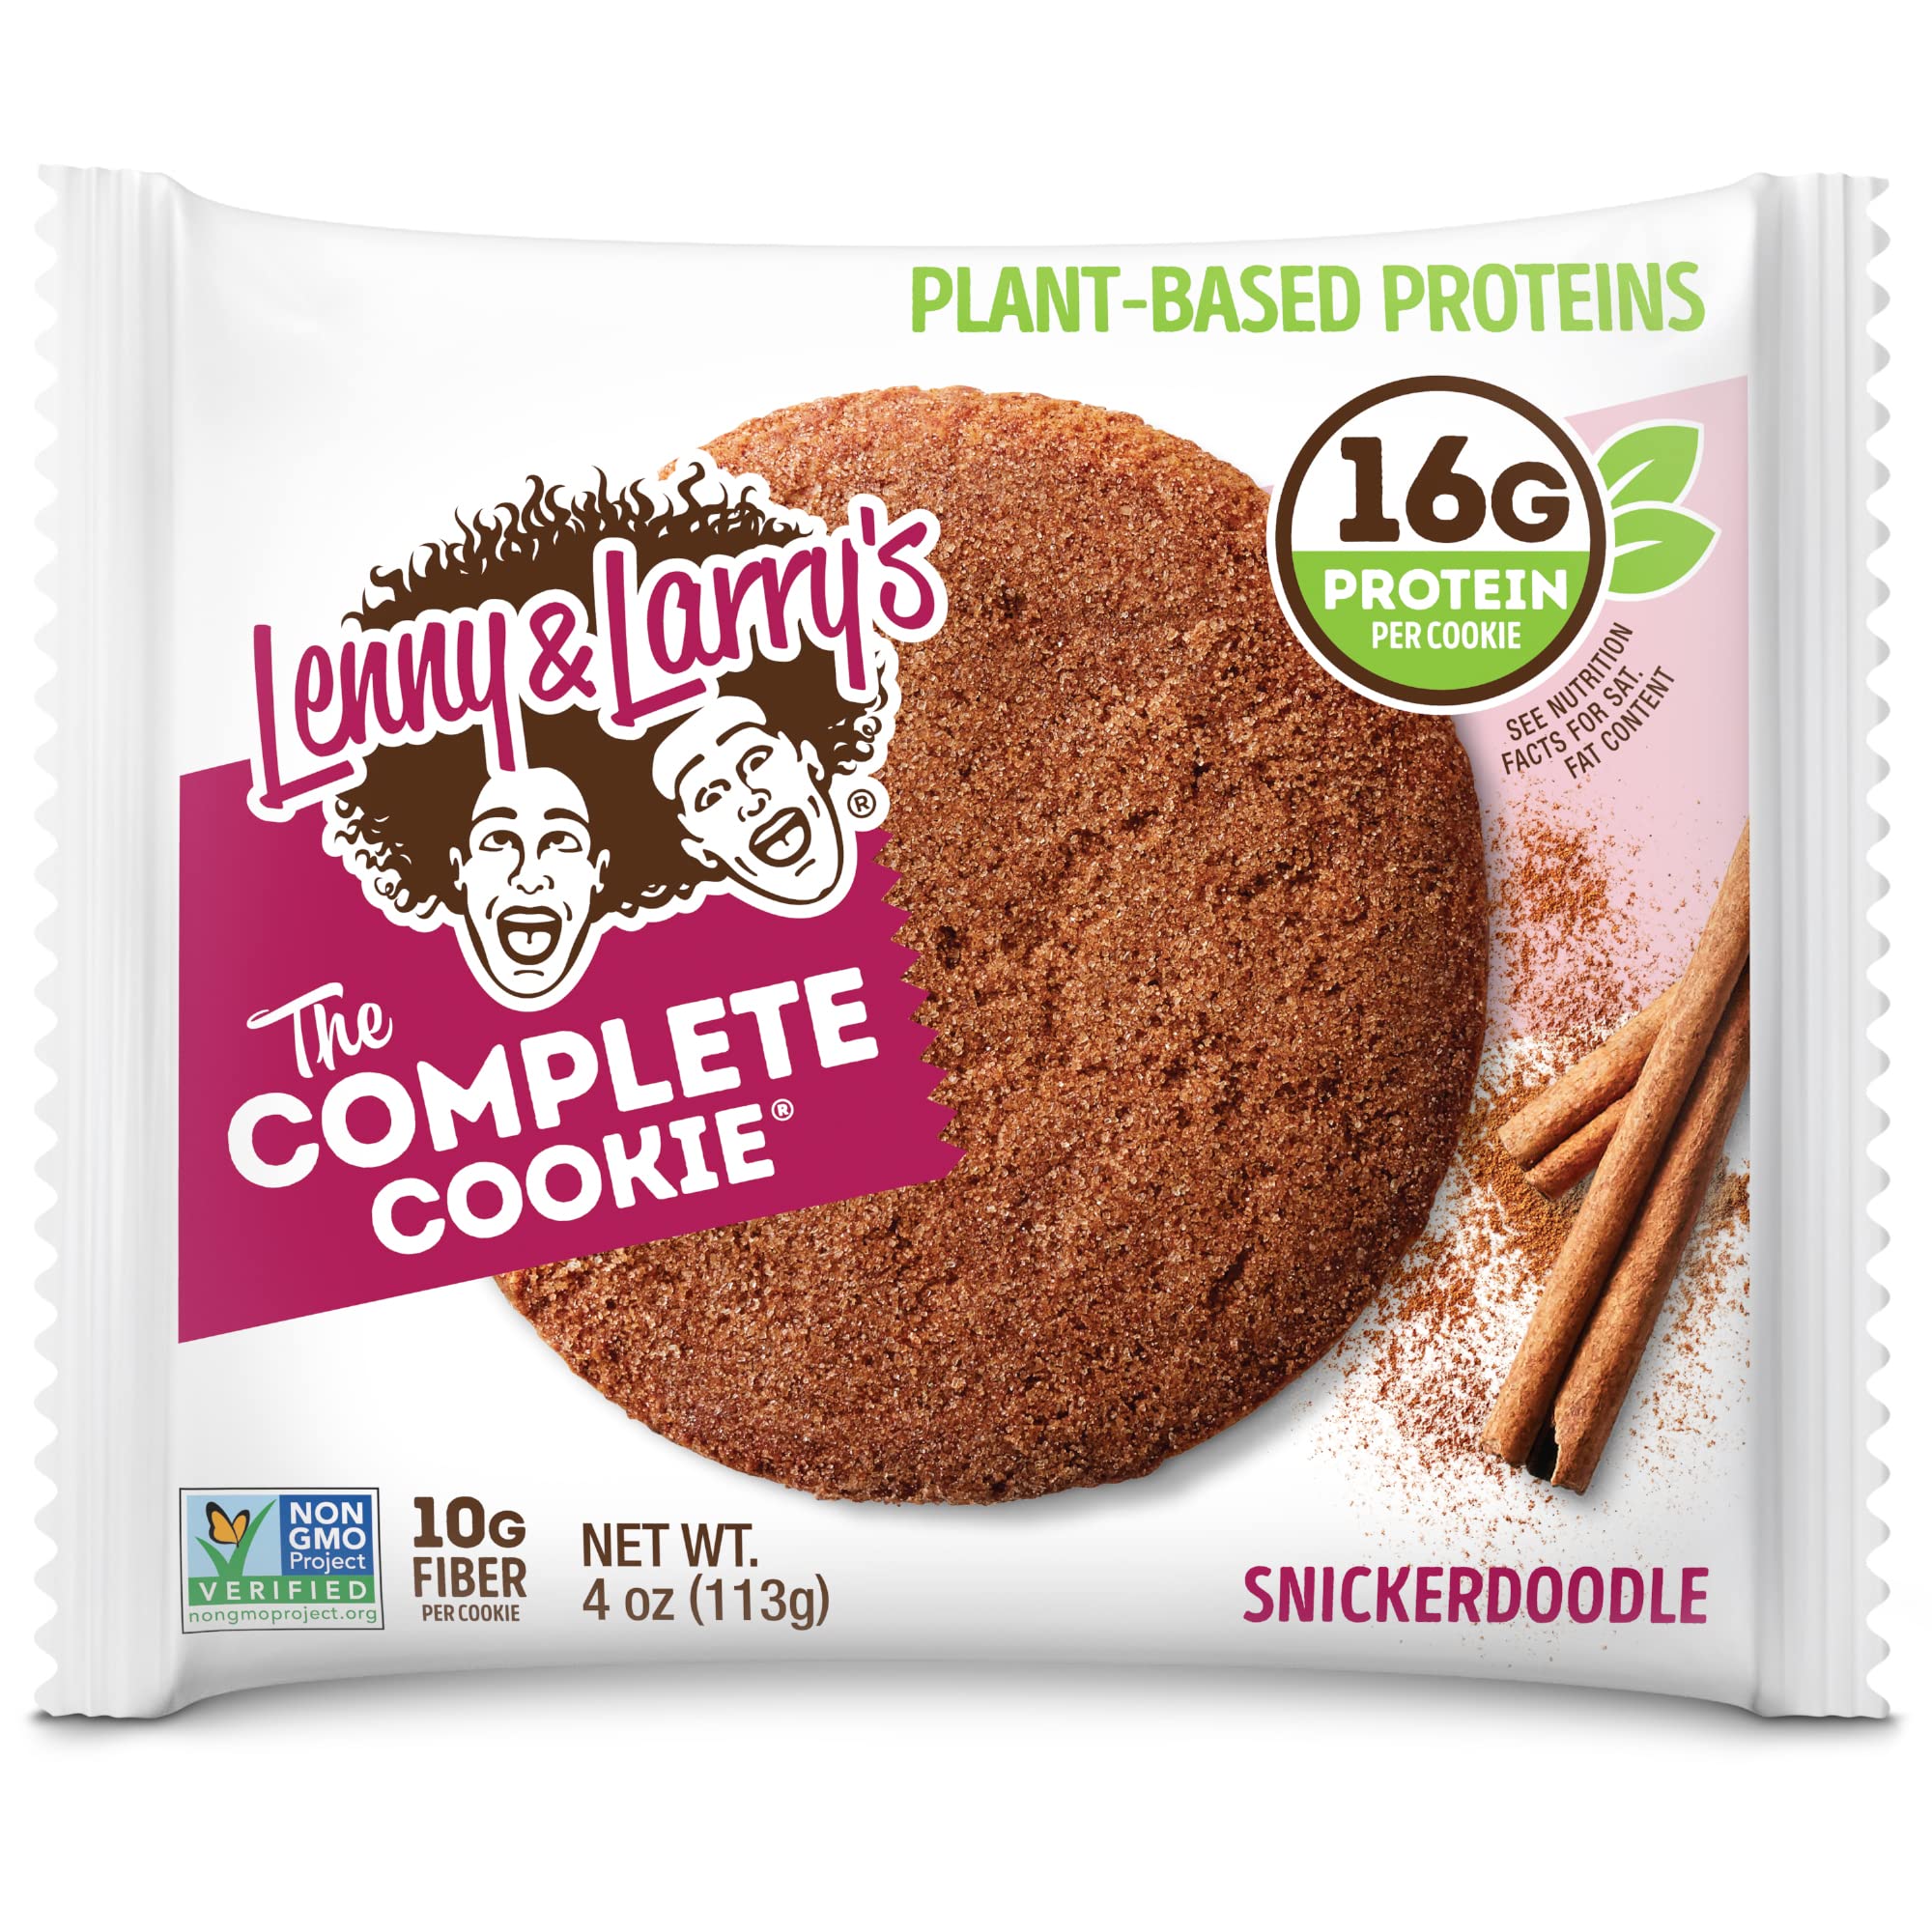 Lenny & Larry's The Complete Cookie, Snickerdoodle, Soft Baked, 16g Plant Protein, Vegan, Non-GMO, 4 Ounce Cookie (Pack of 12) $11.1